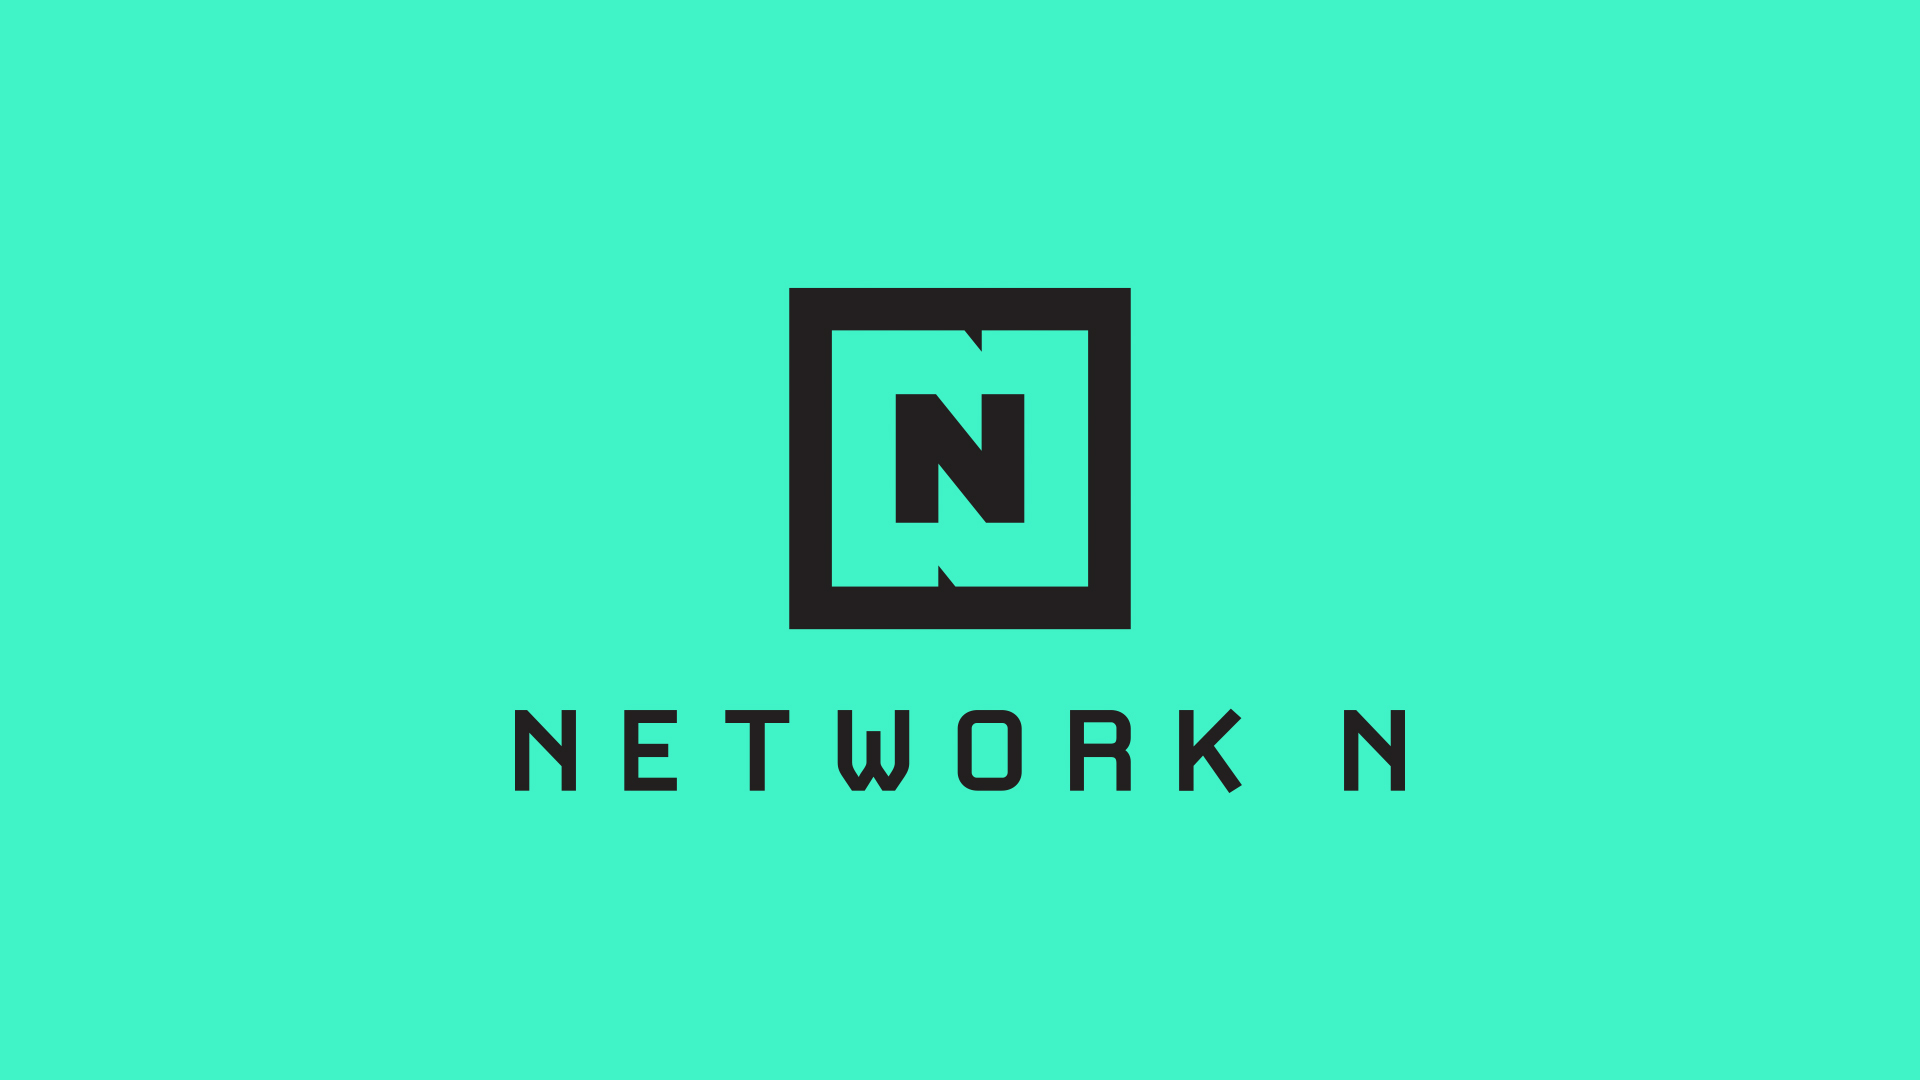 The Network N inclusion fund